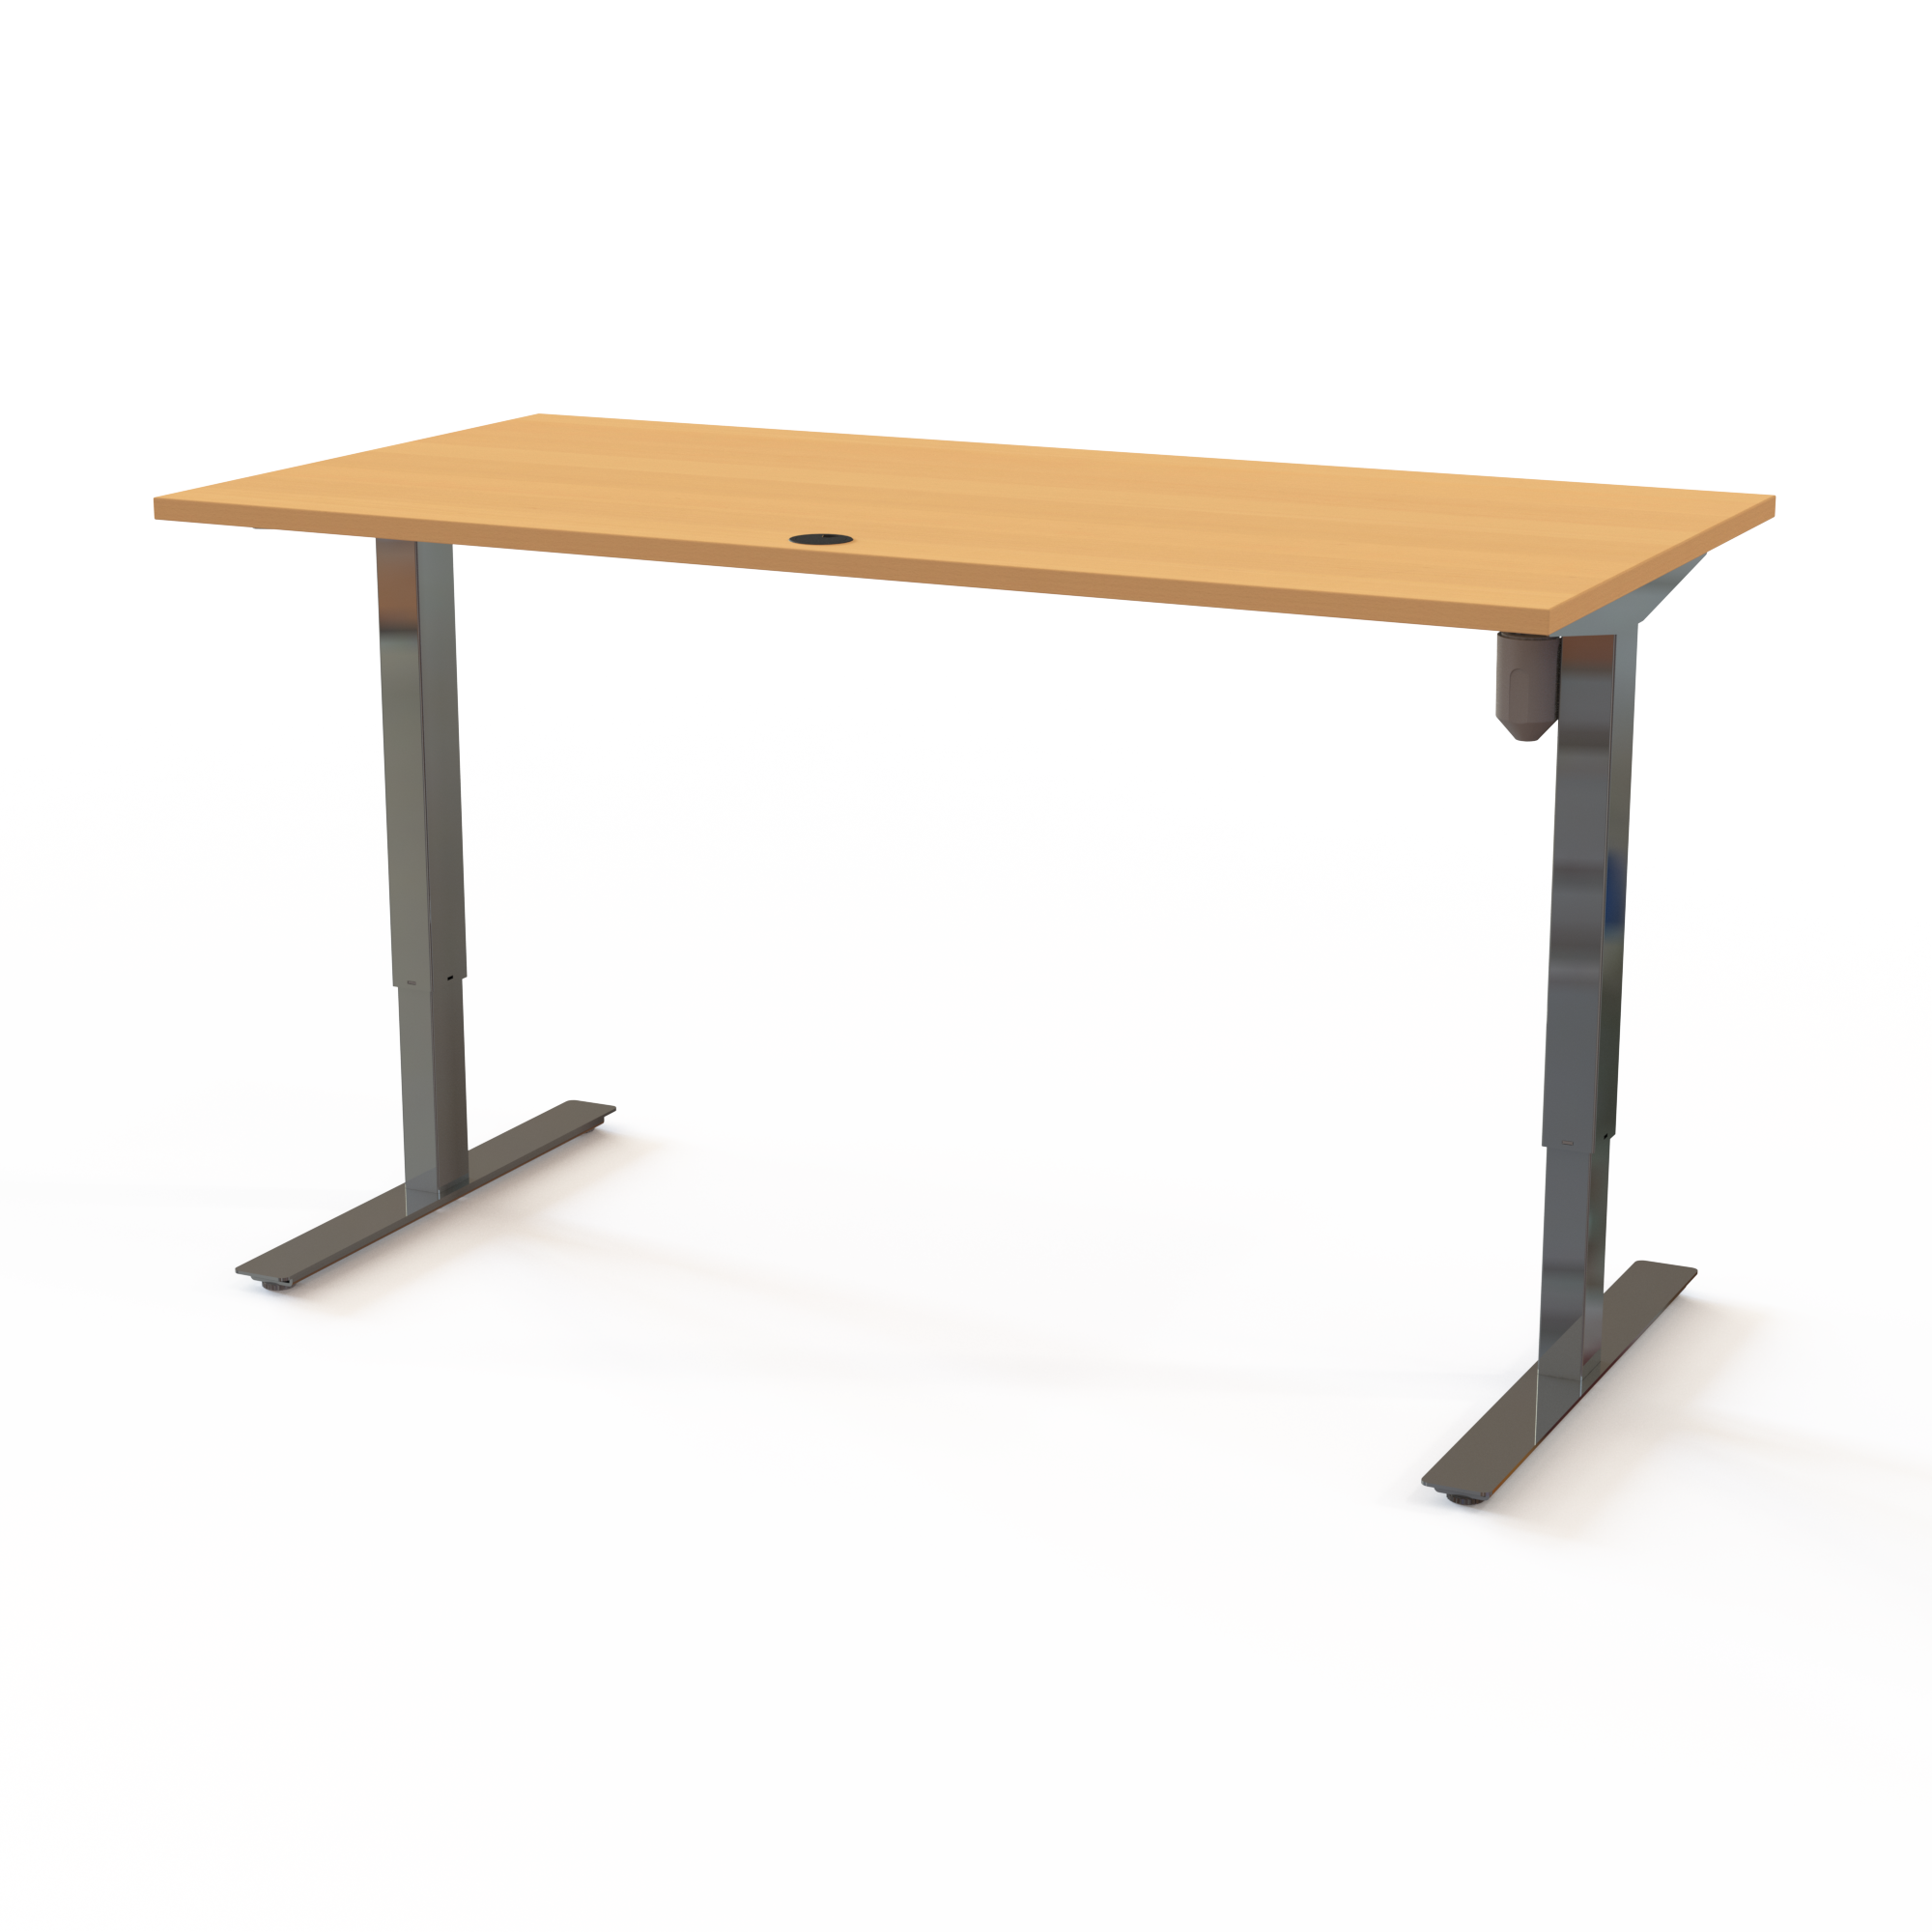 Electric Adjustable Desk | 160x80 cm | Beech with chrome frame